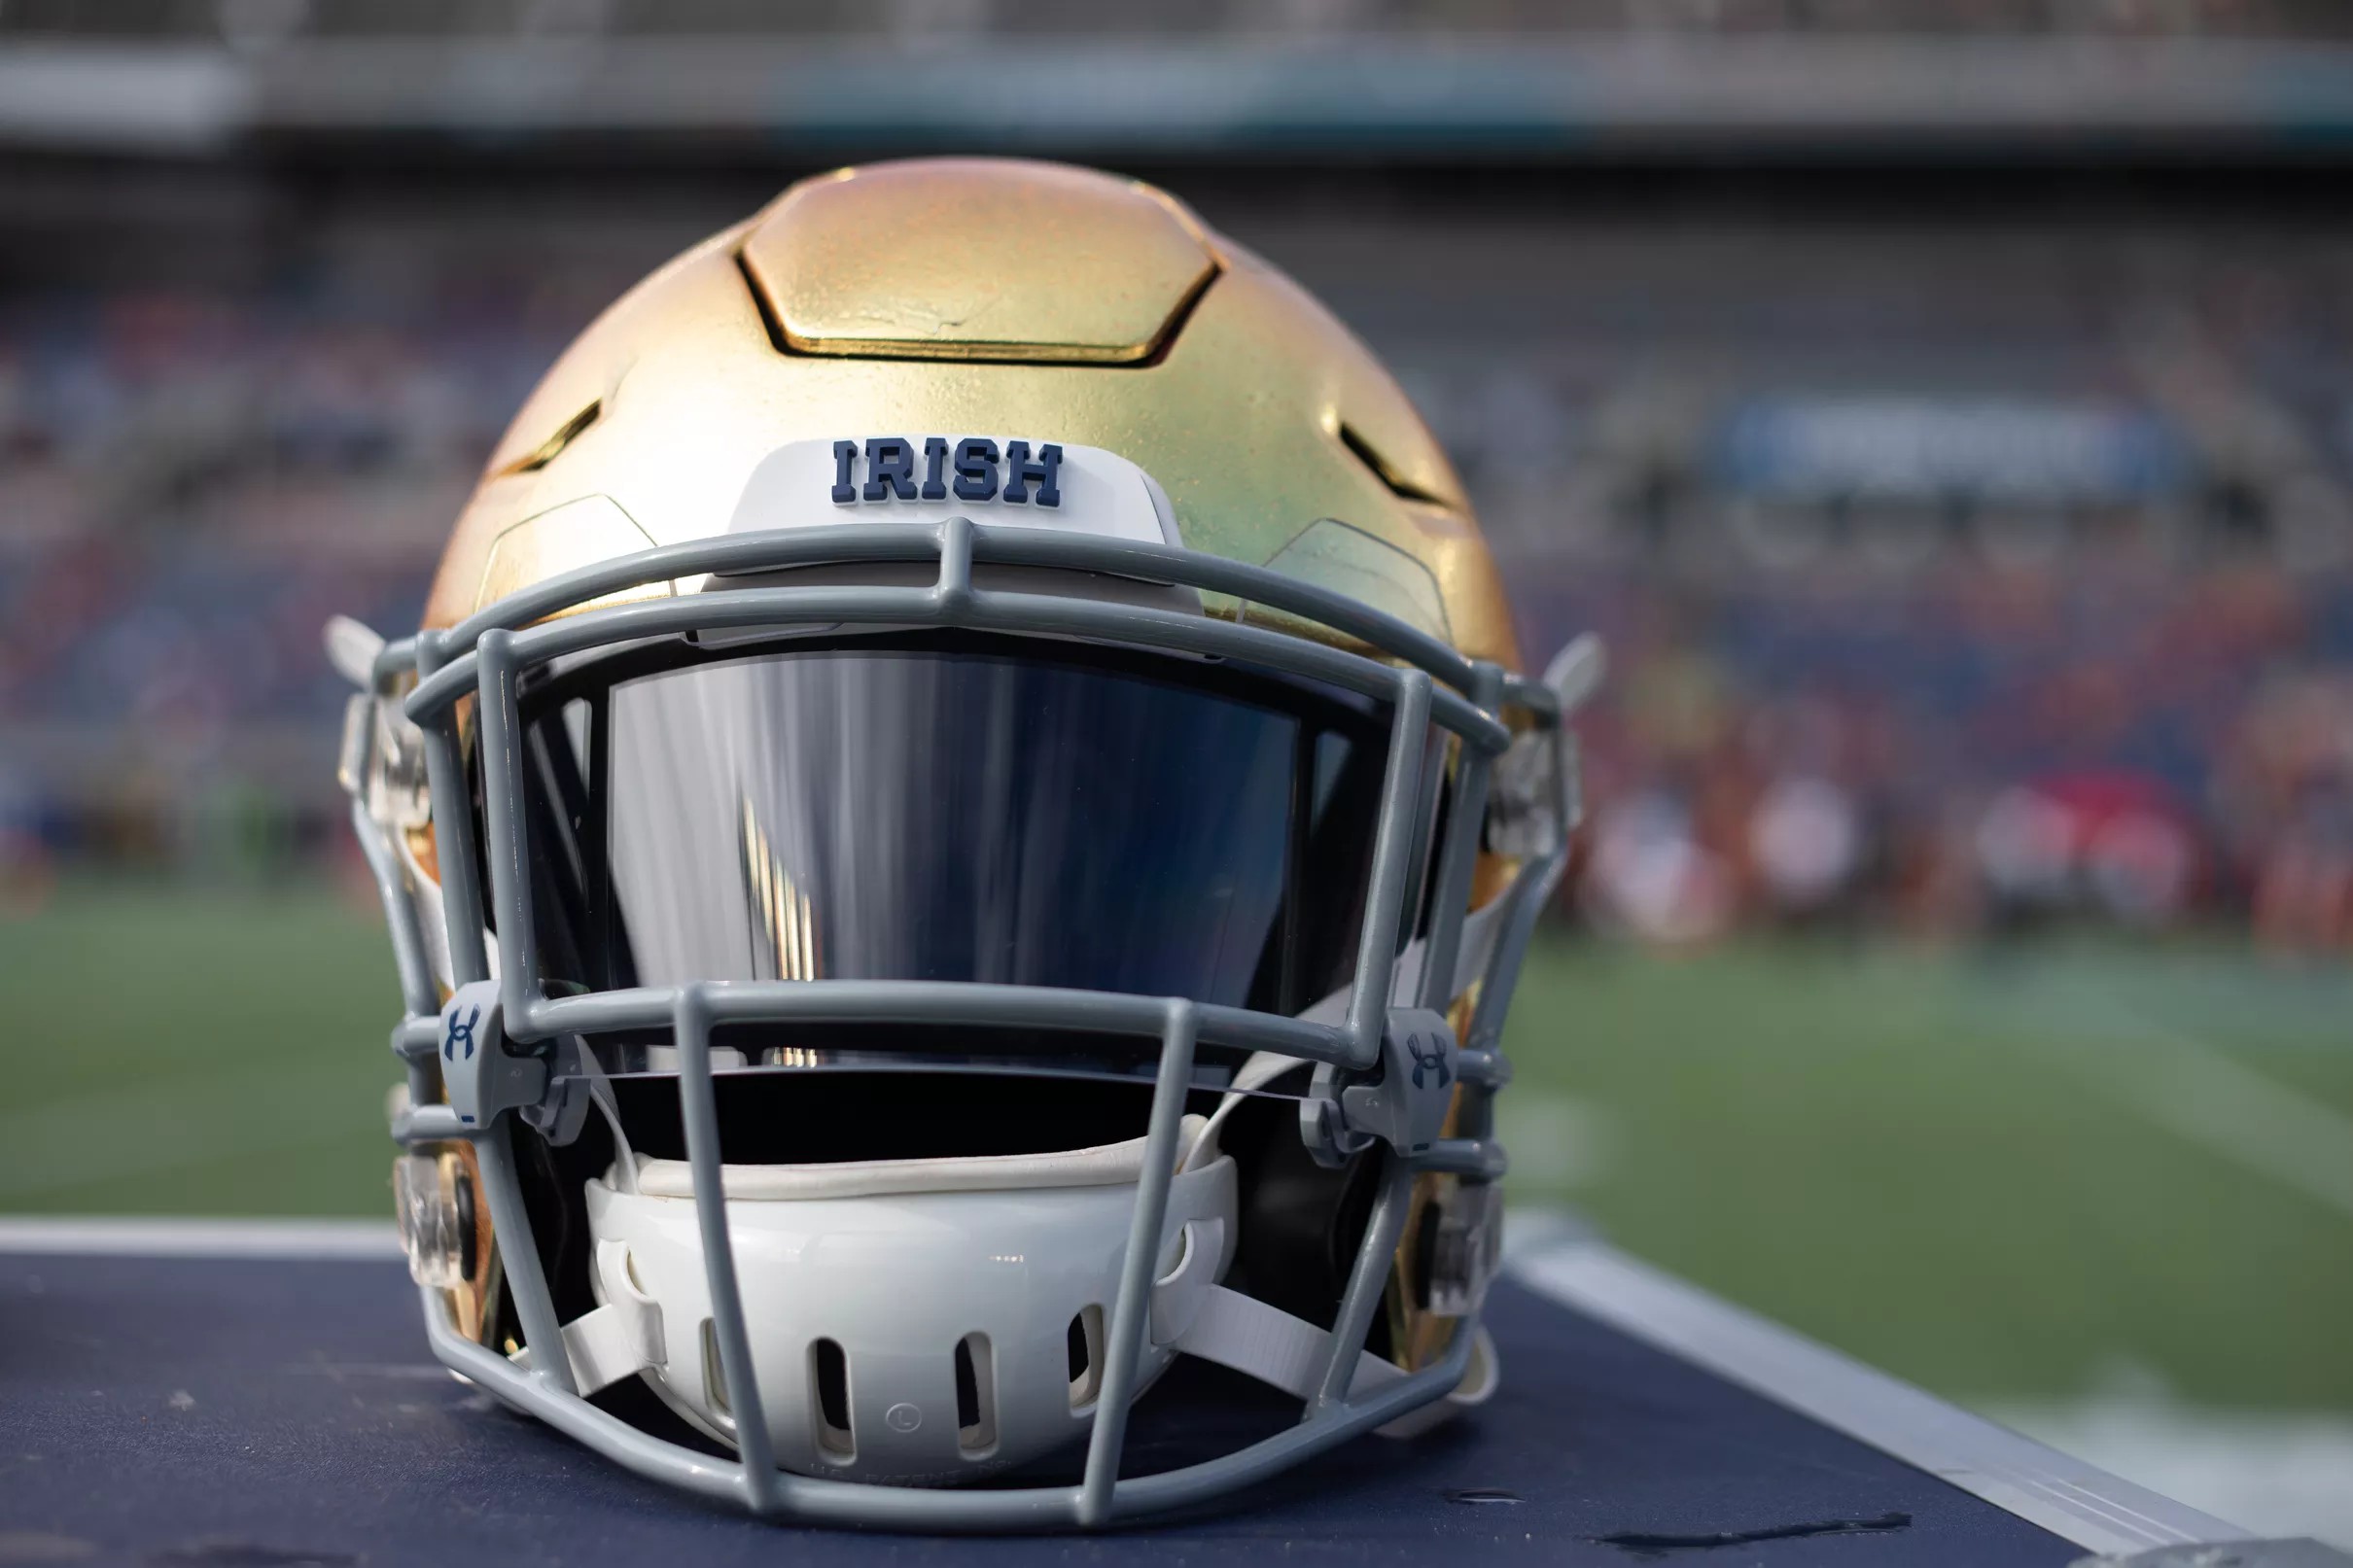 Ranking Notre Dame Rivals’ Uniforms in Order of Awesomeness